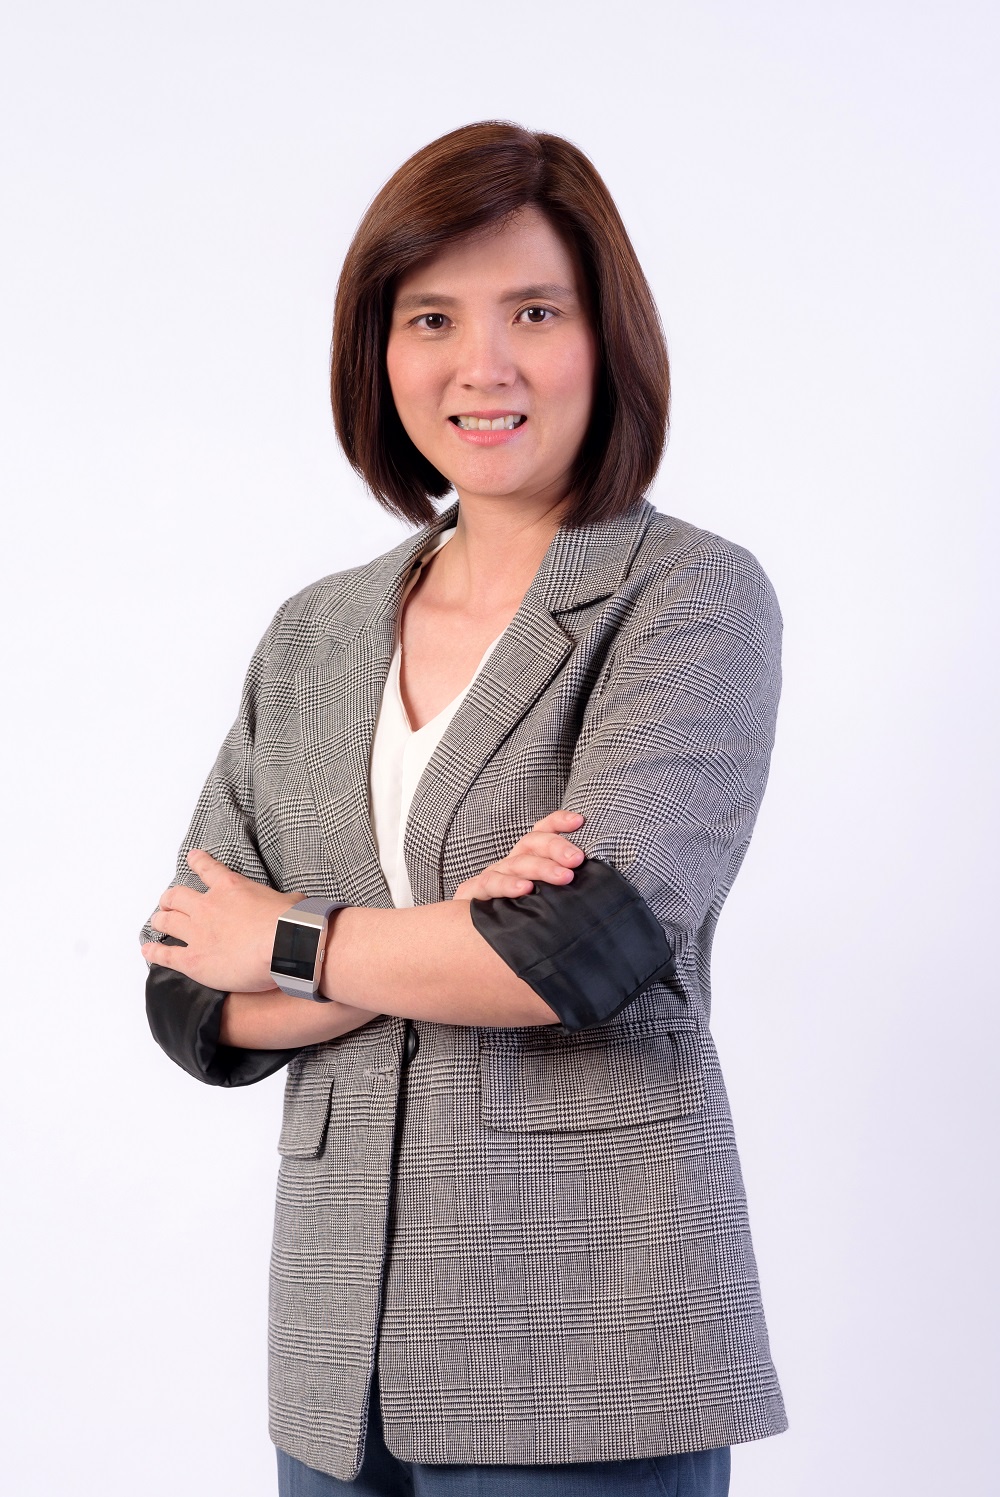 Hybrid working is the business trend of 2022, PwC Thailand says